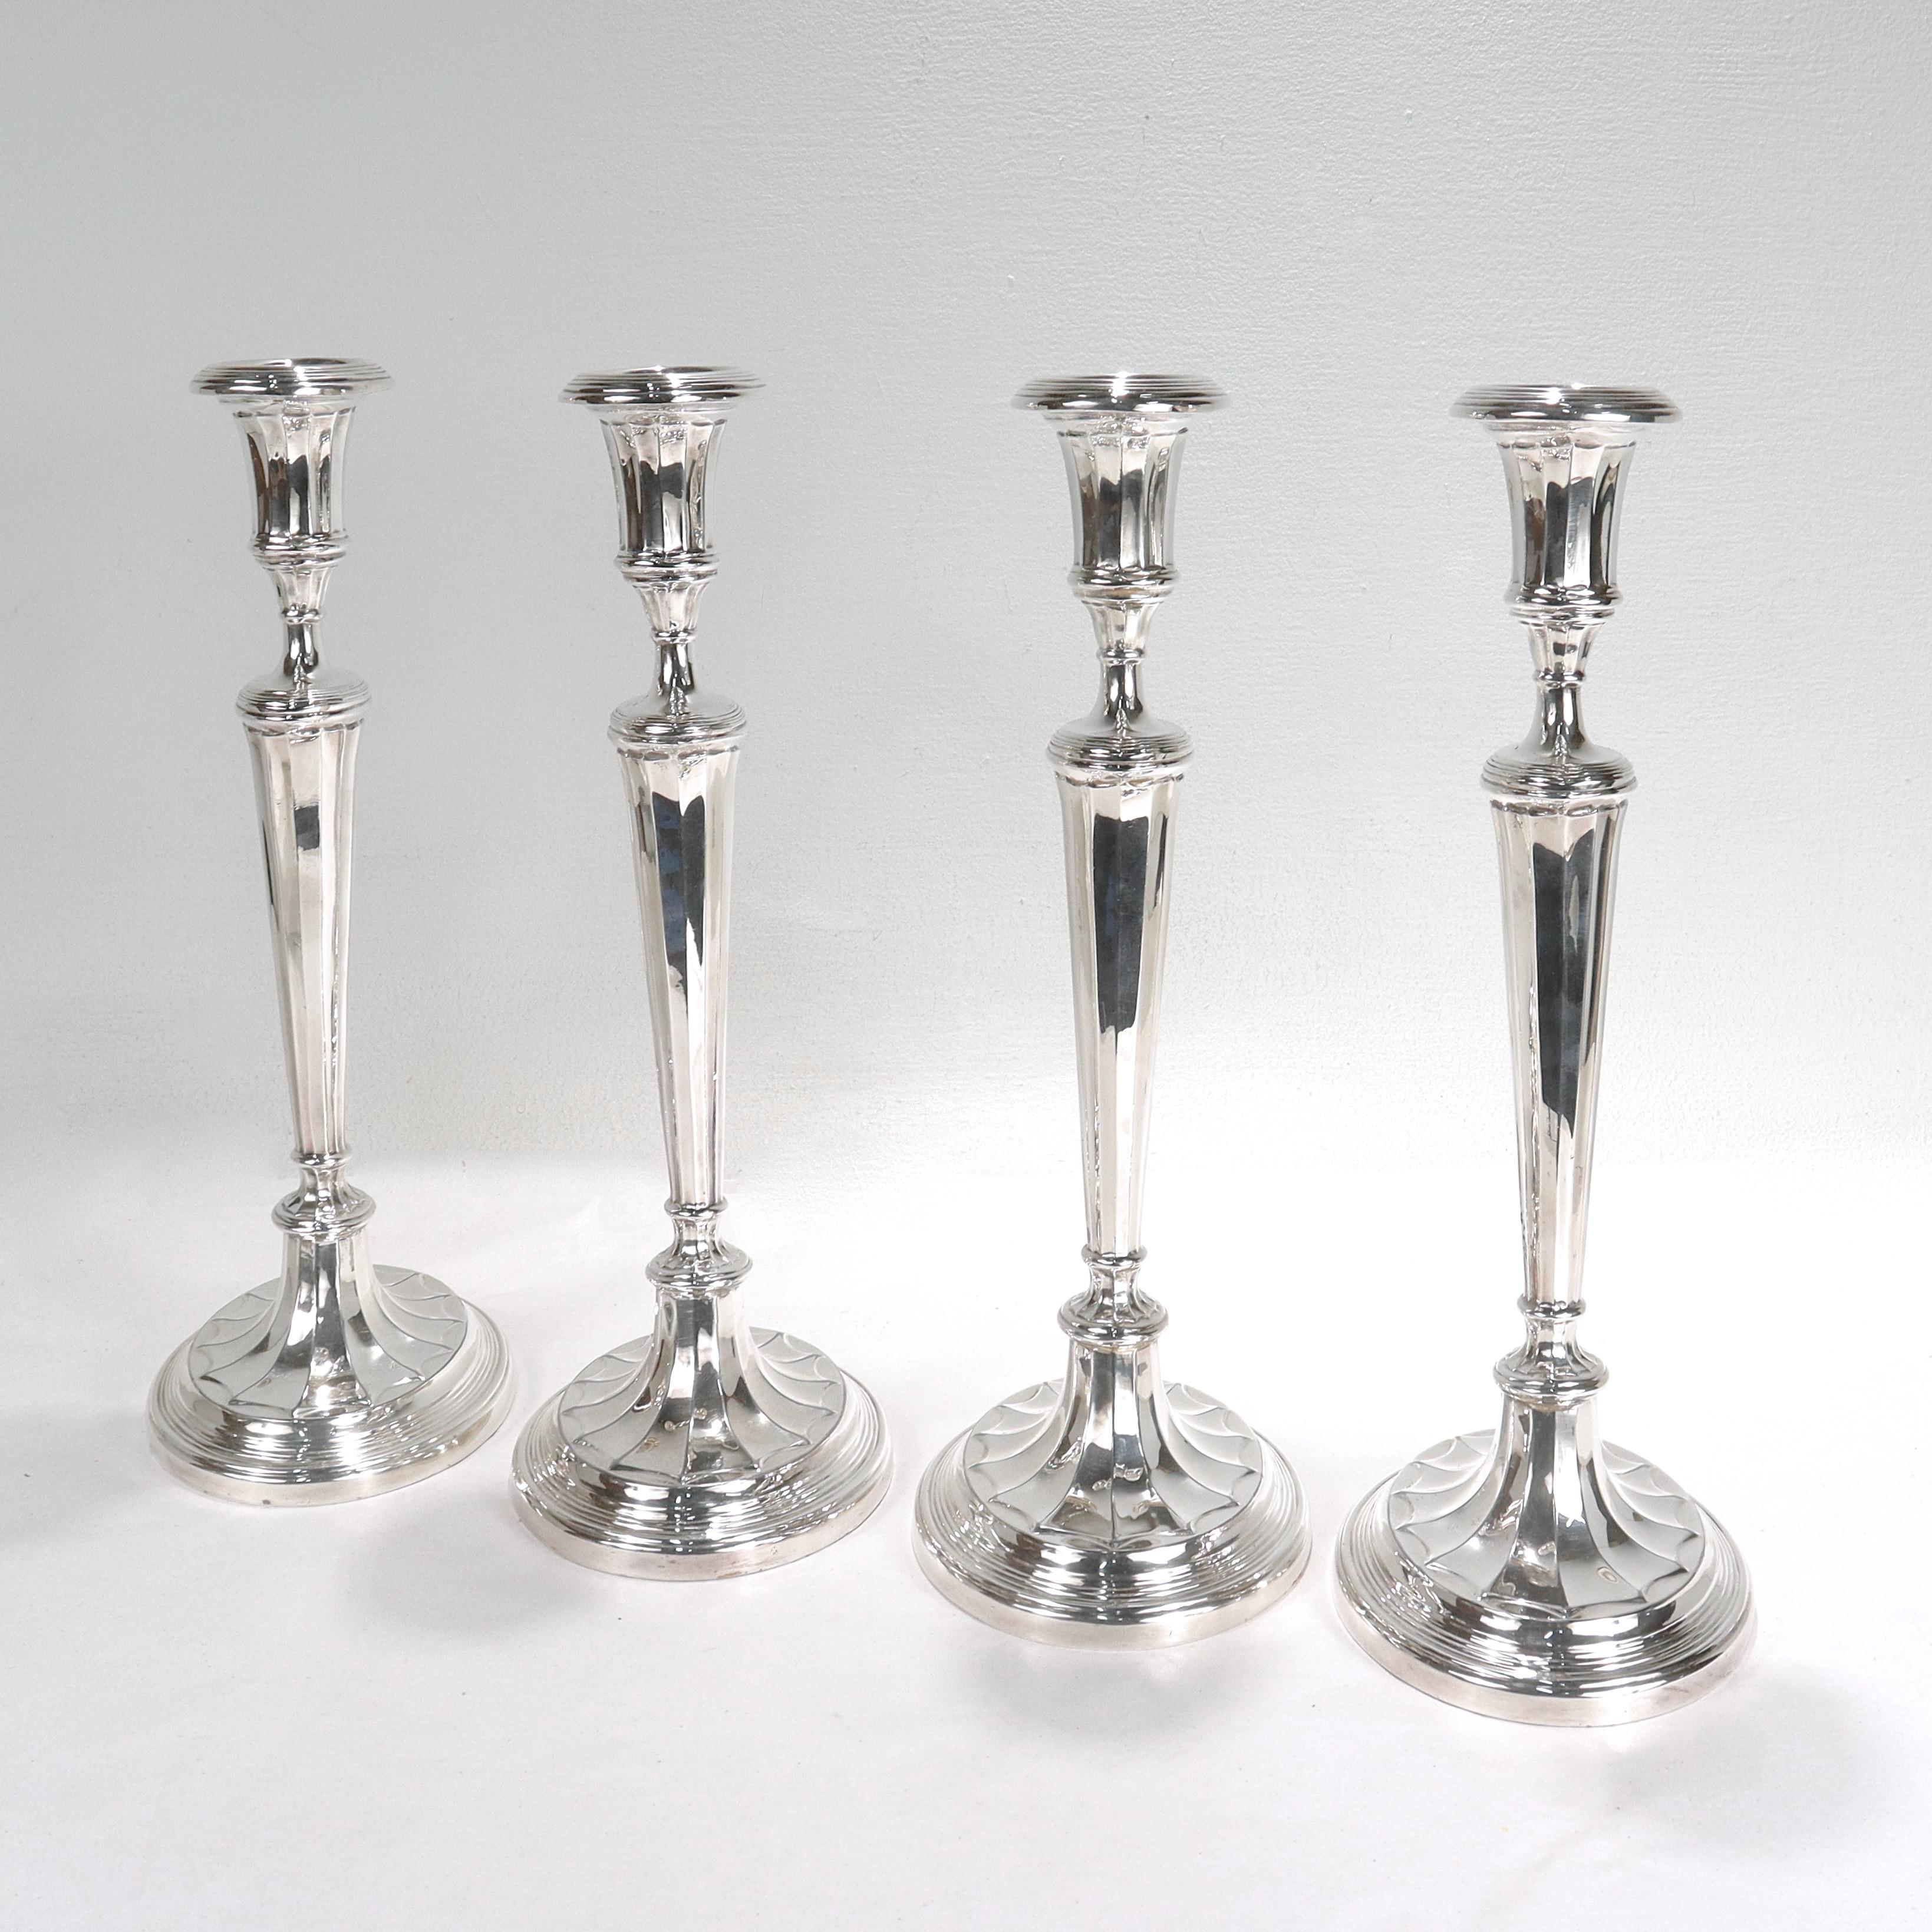 Set of 4 Tall Matched Regency Style Silver Plated Candlesticks For Sale 1